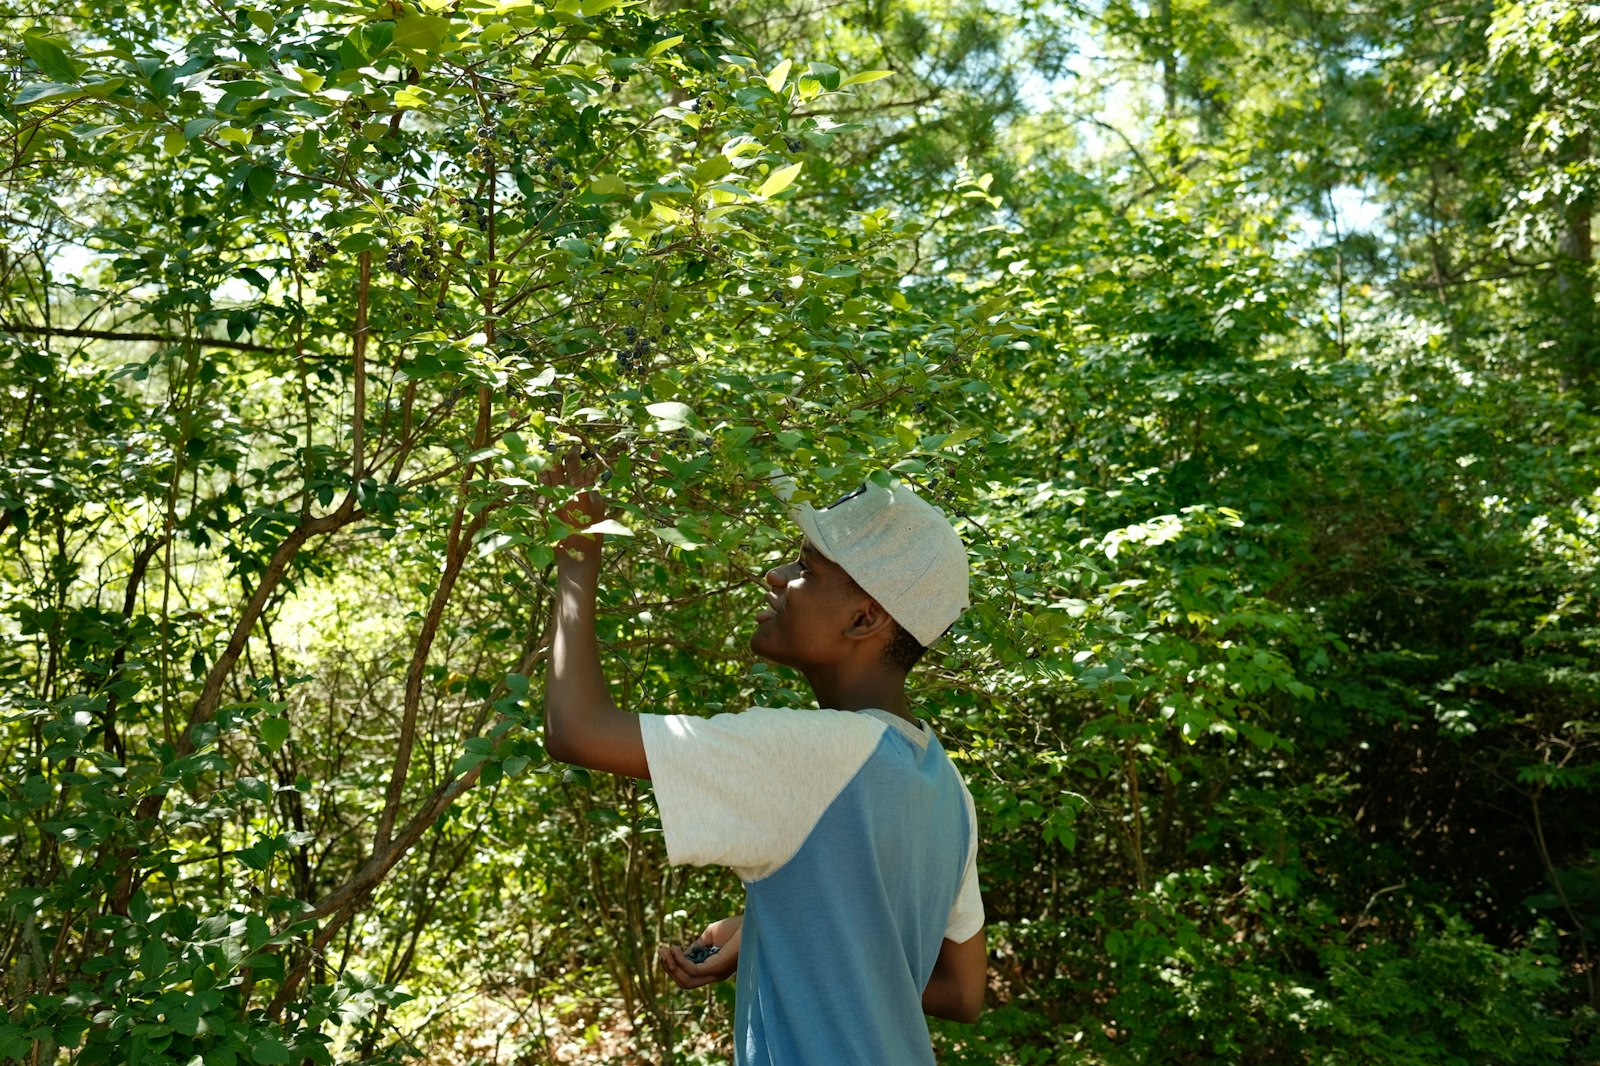 A young man looks up at leaves on a tree